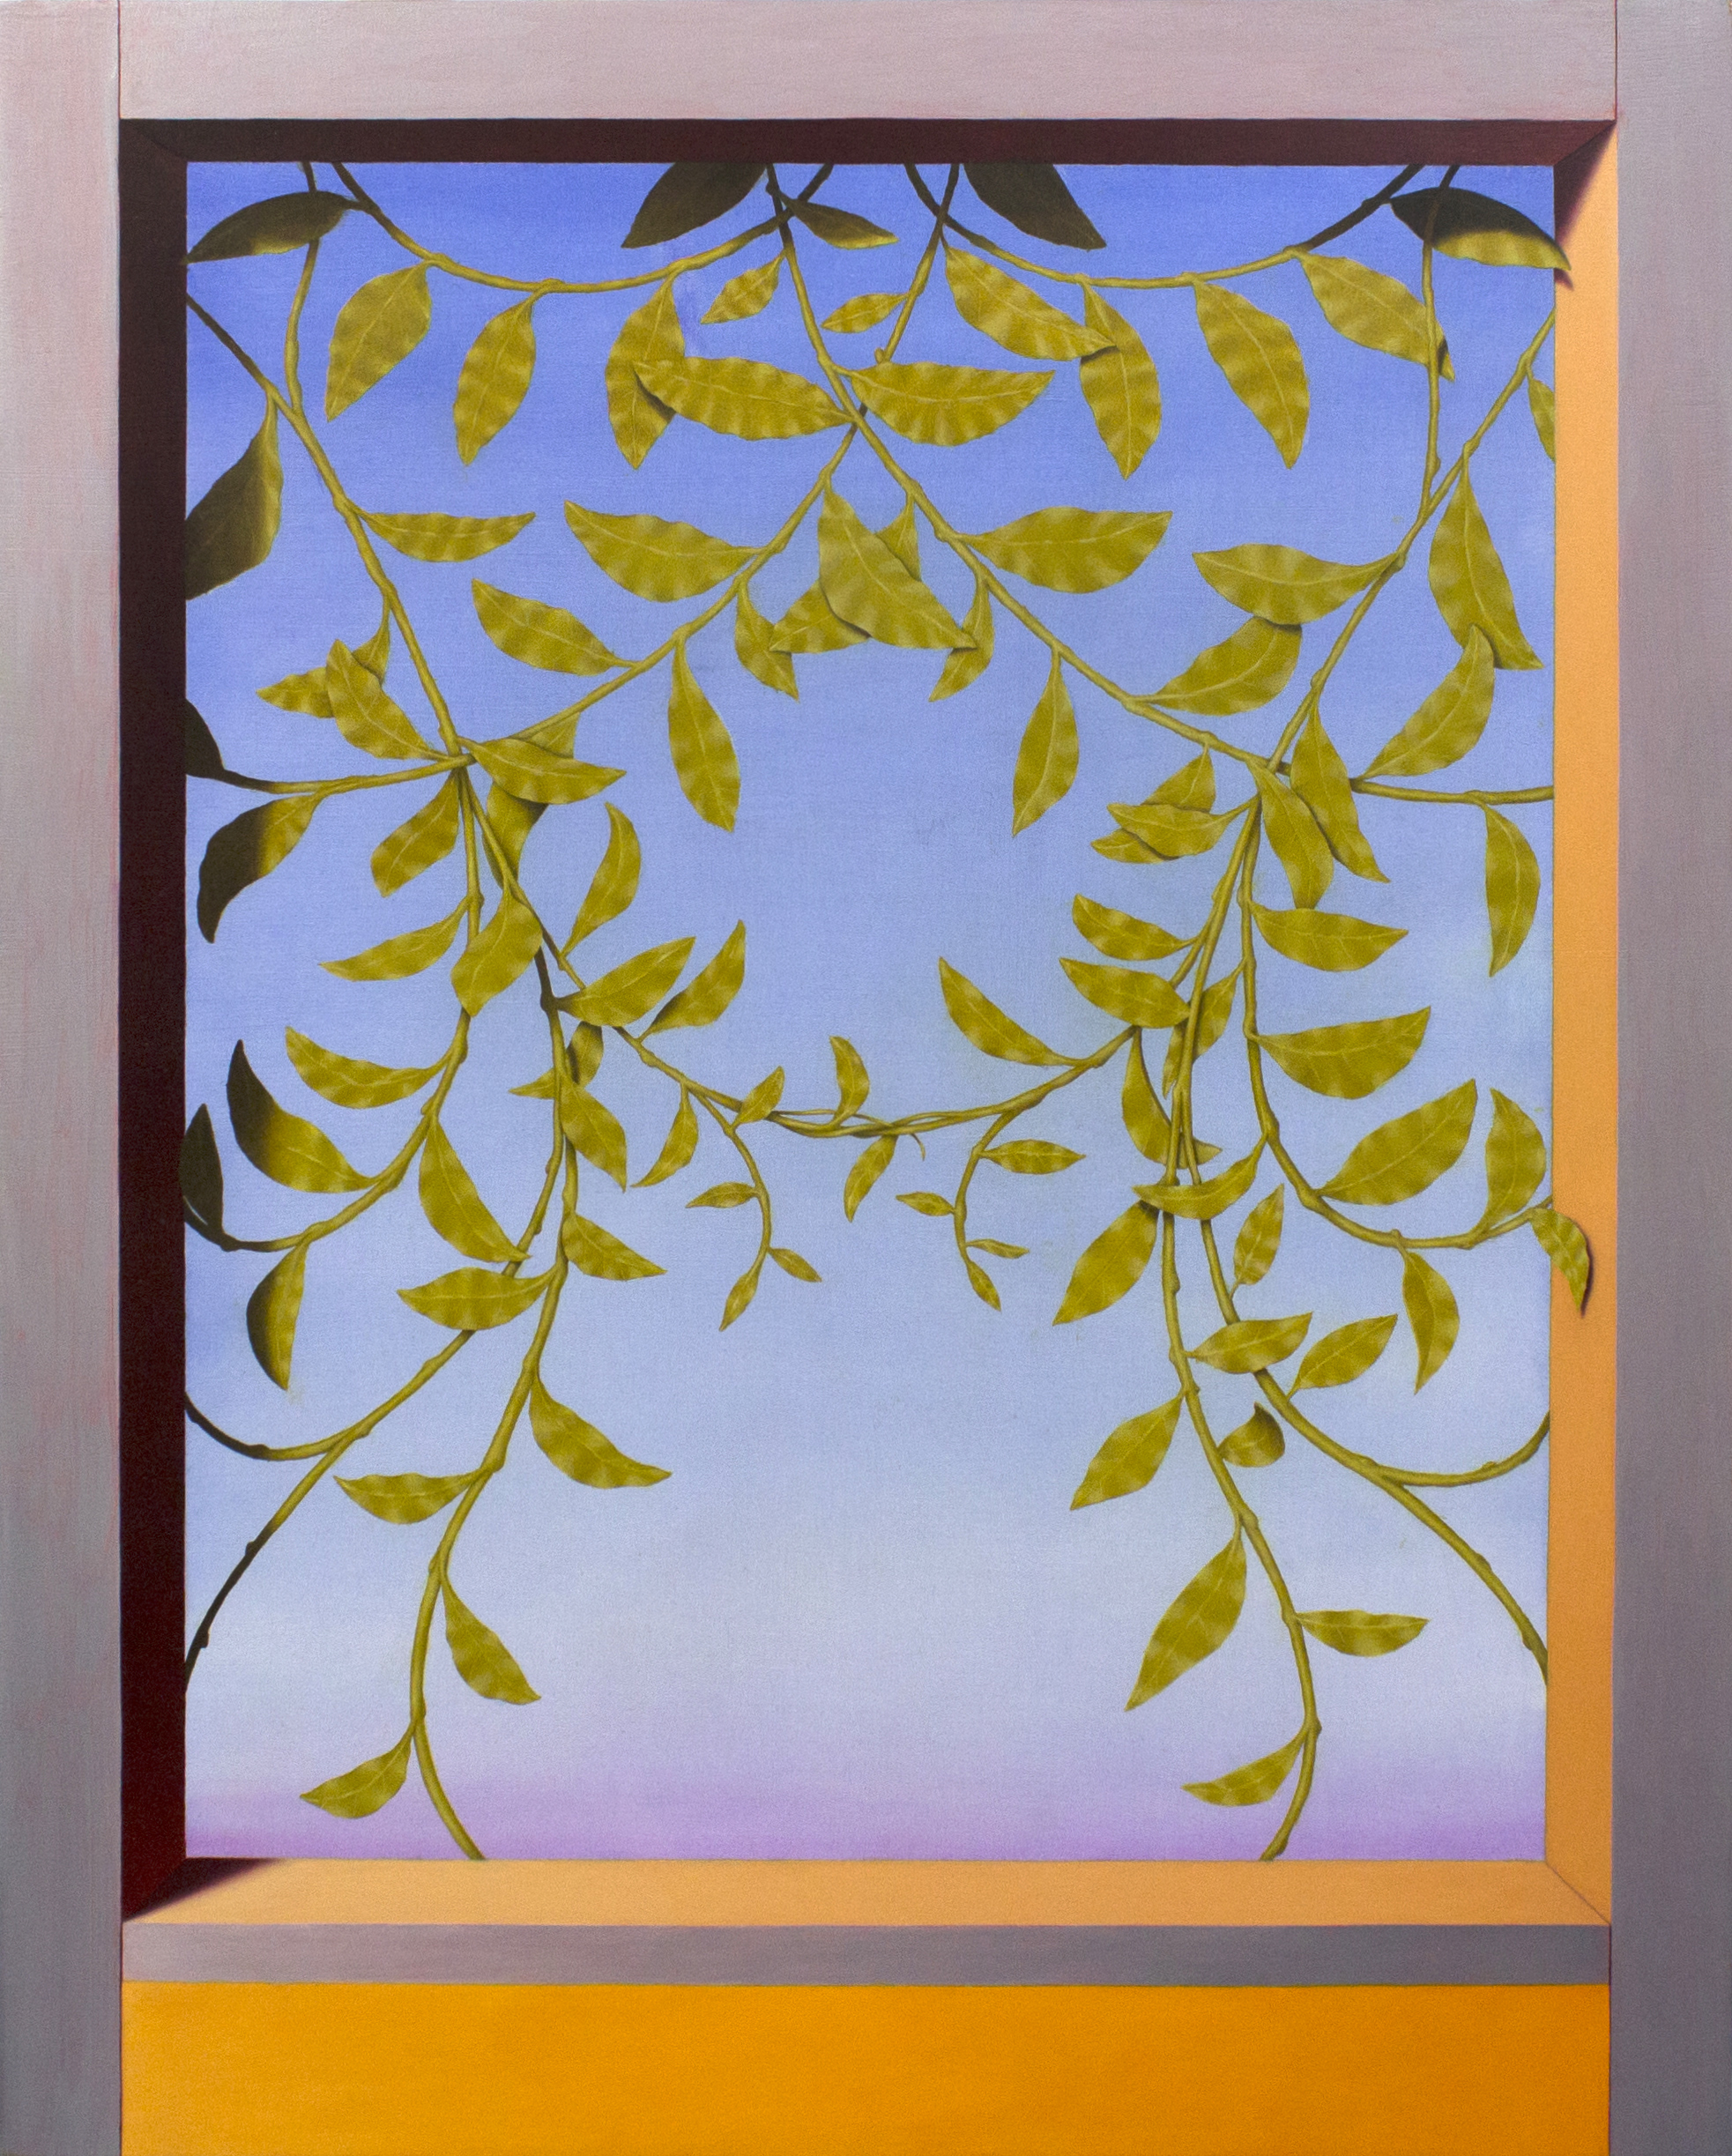  Threshold (Wisteria)  2018  Oil on wood panel  20 x 16 in 